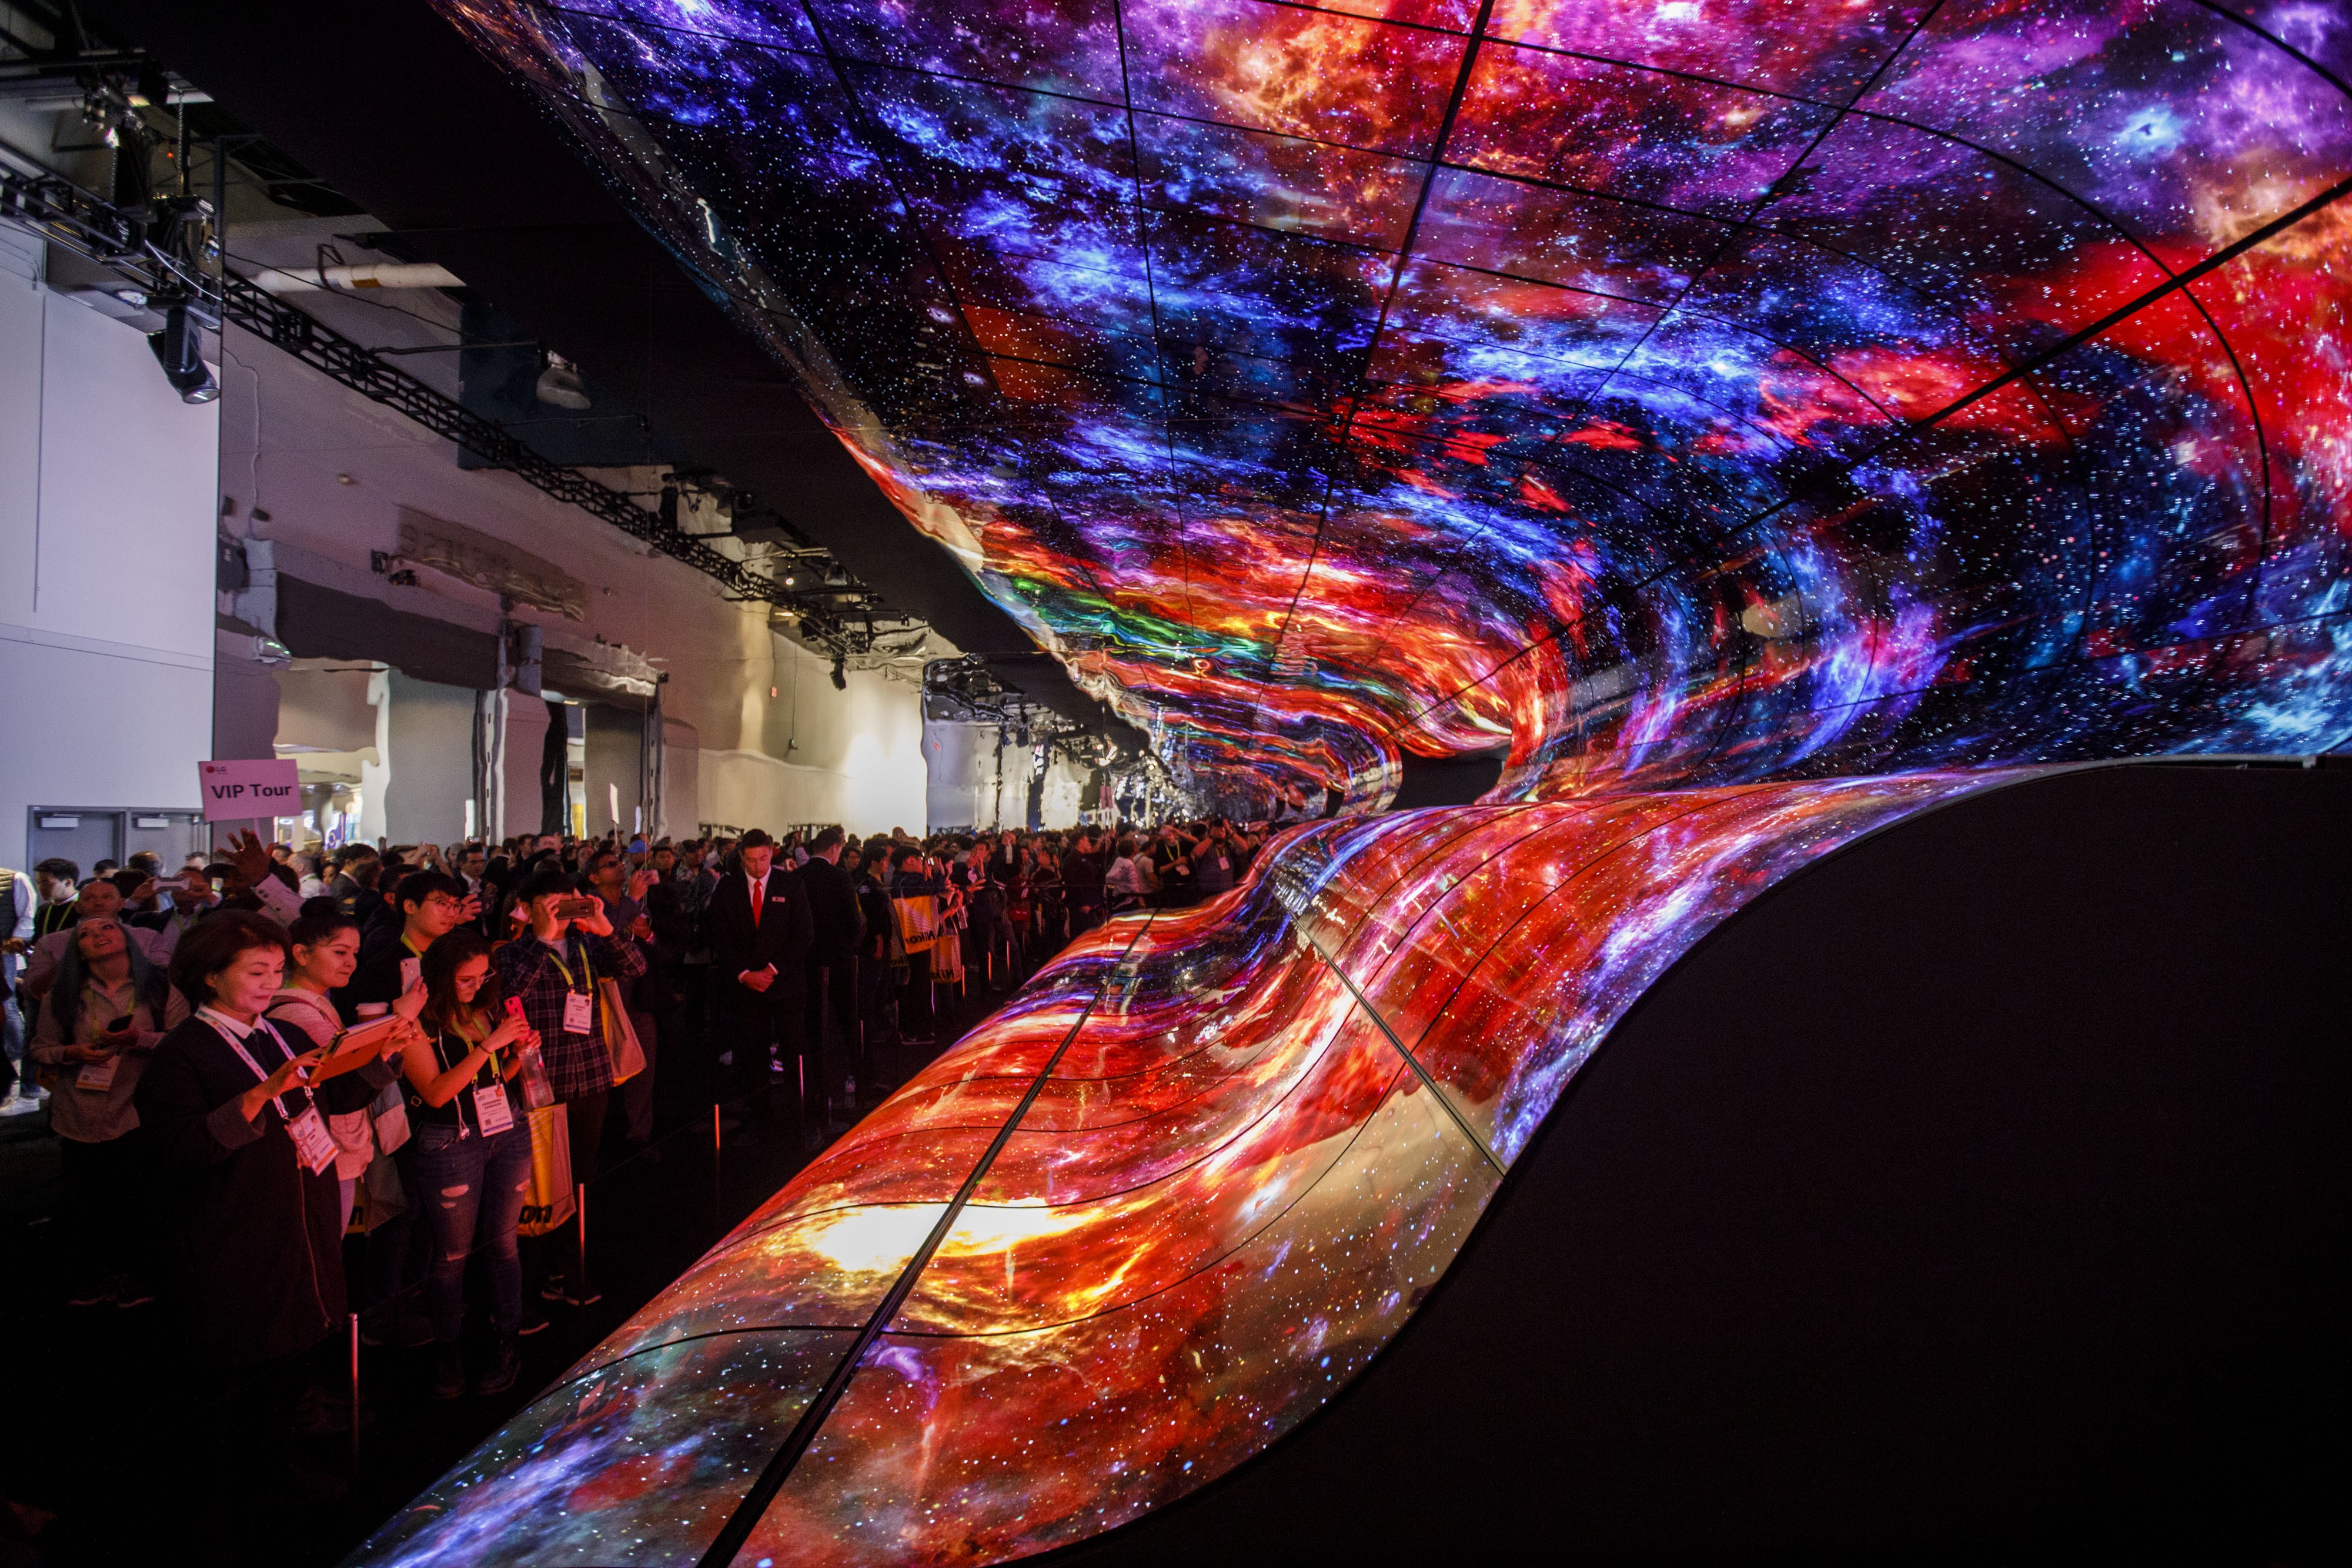 LG’s curved electronic display wall at CES 2019. Photo: Bloomberg